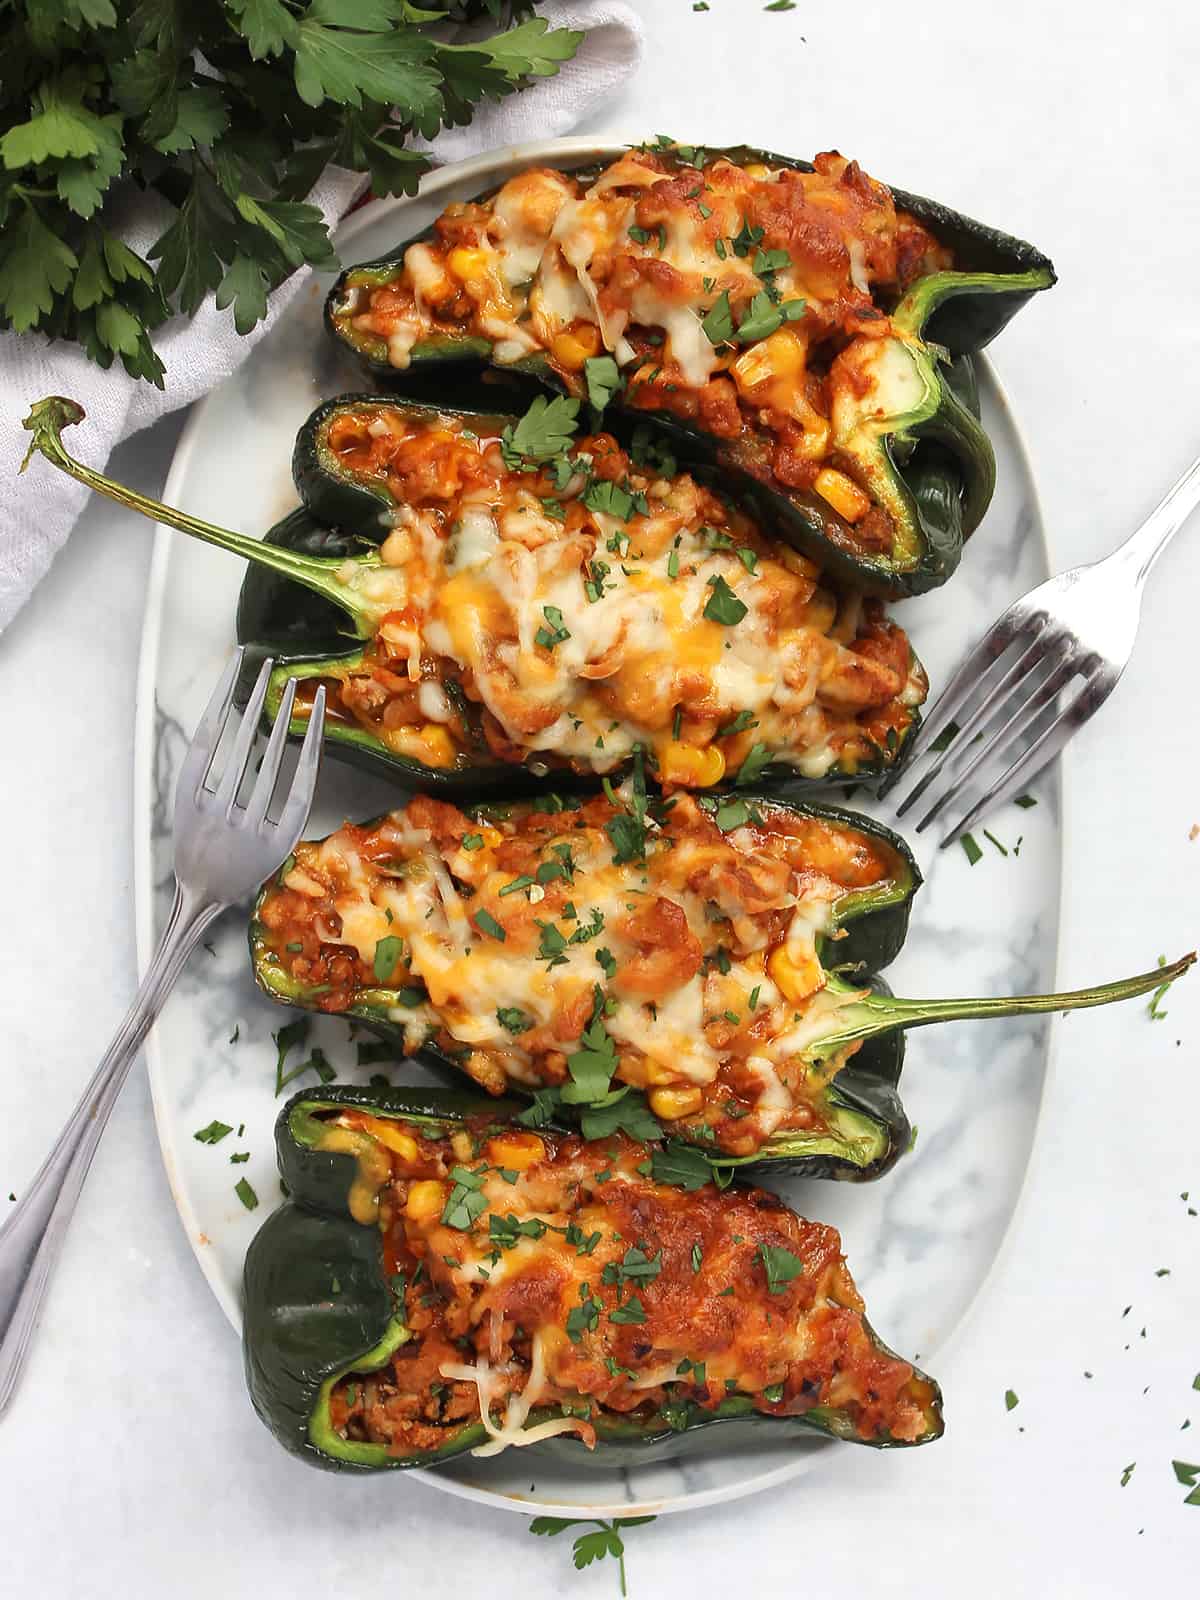 Four poblano pepper halves stuffed with chicken and corn and topped with cheese on an oval serving plate.